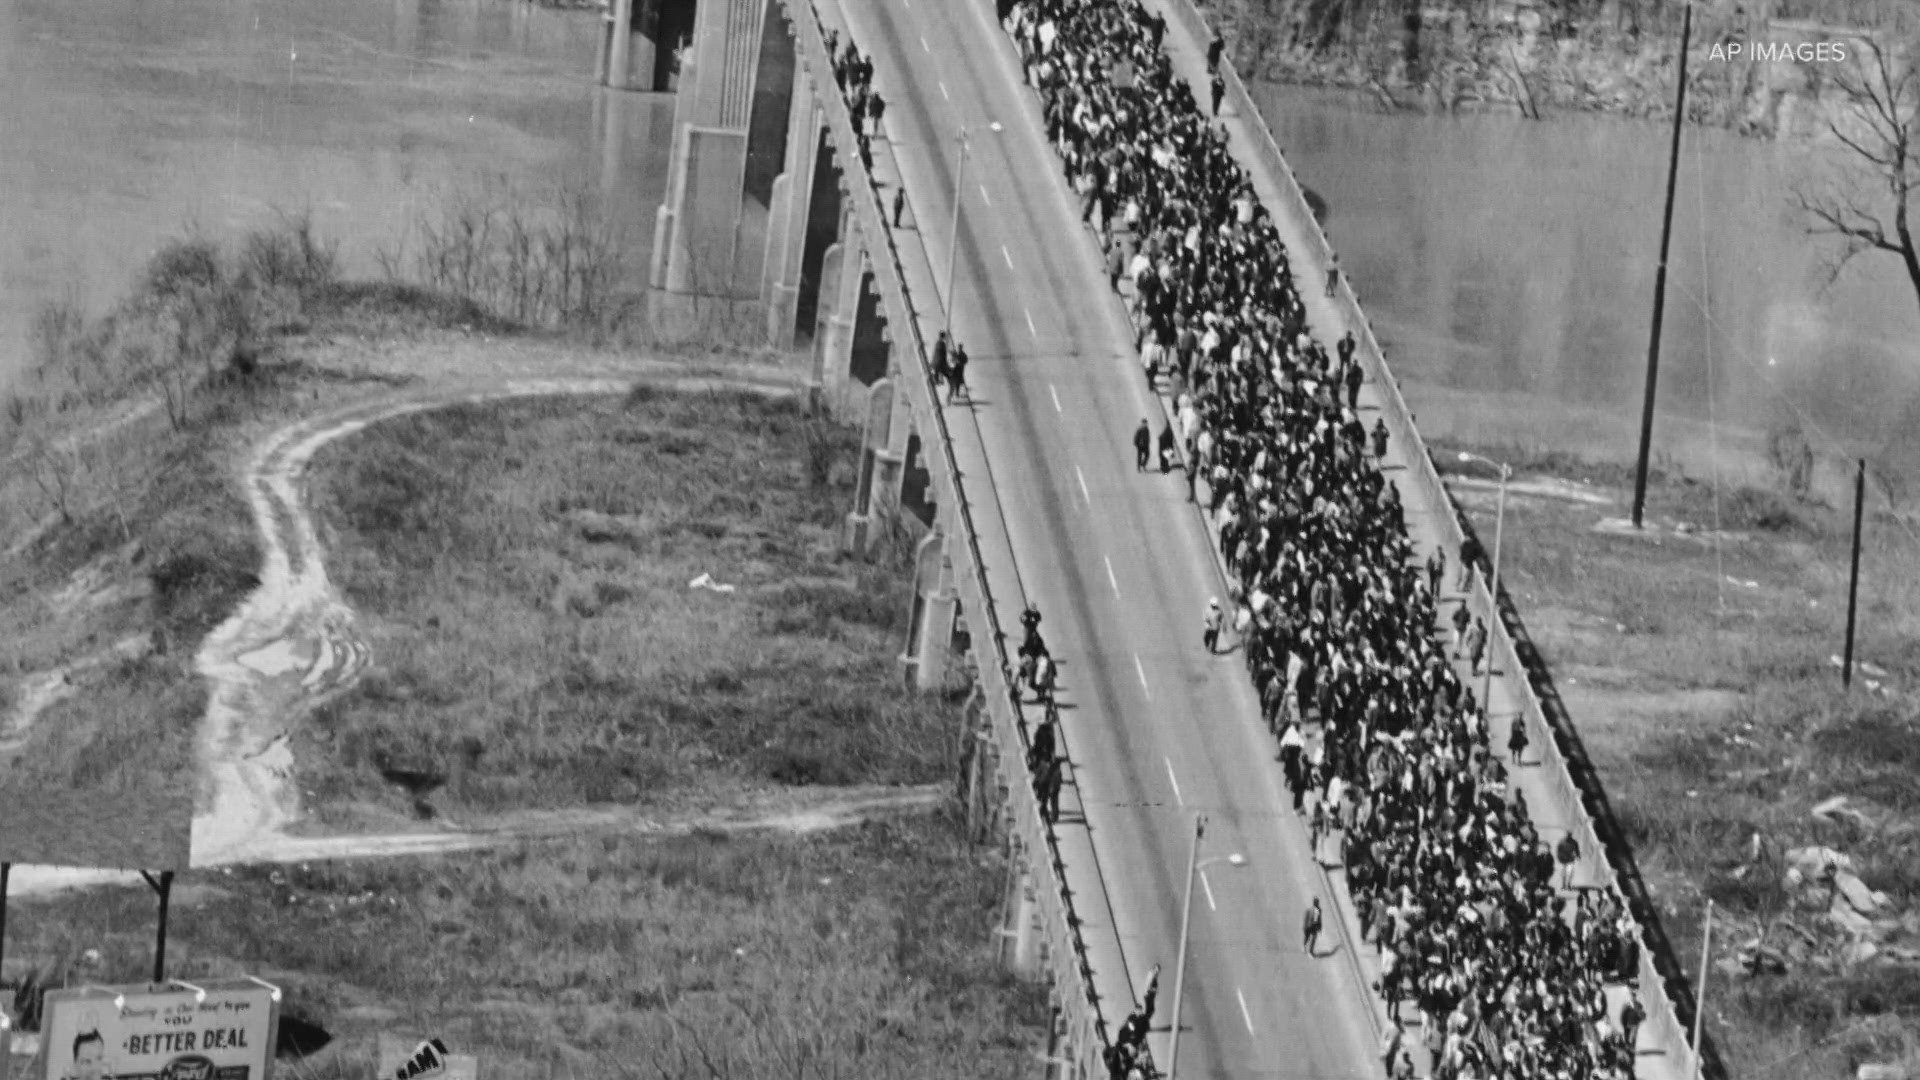 Denise Holt and Alice Moore were just teenagers when they walked the Edmund Pettis bridge in Selma, Alabama in 1965.